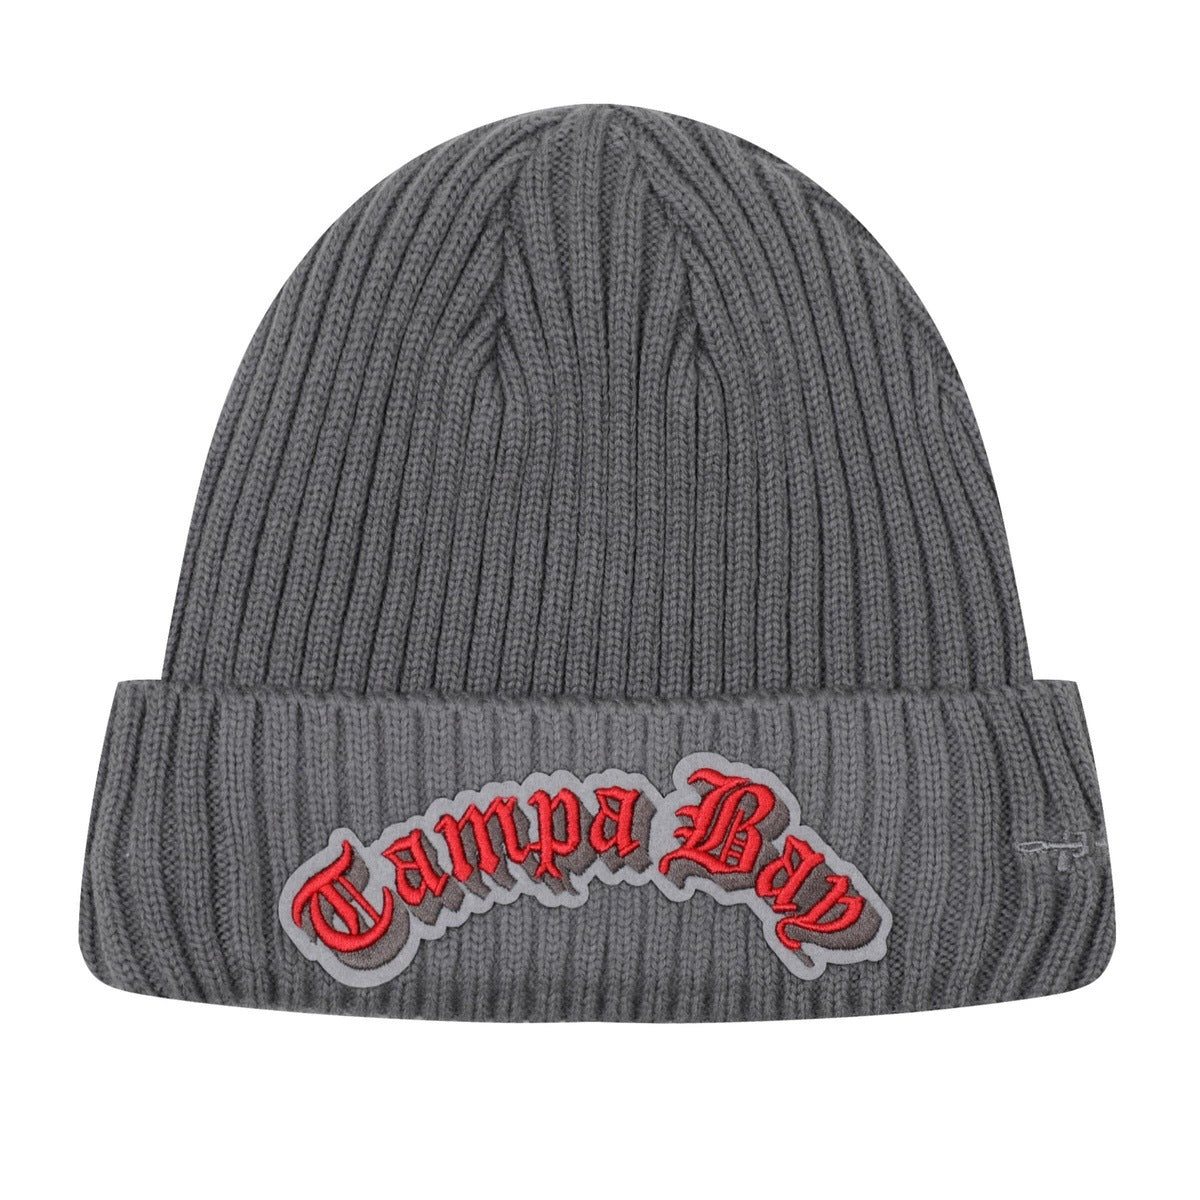 TAMPA BAY BUCCANEERS OLD ENGLISH BEANIE (GRAY)